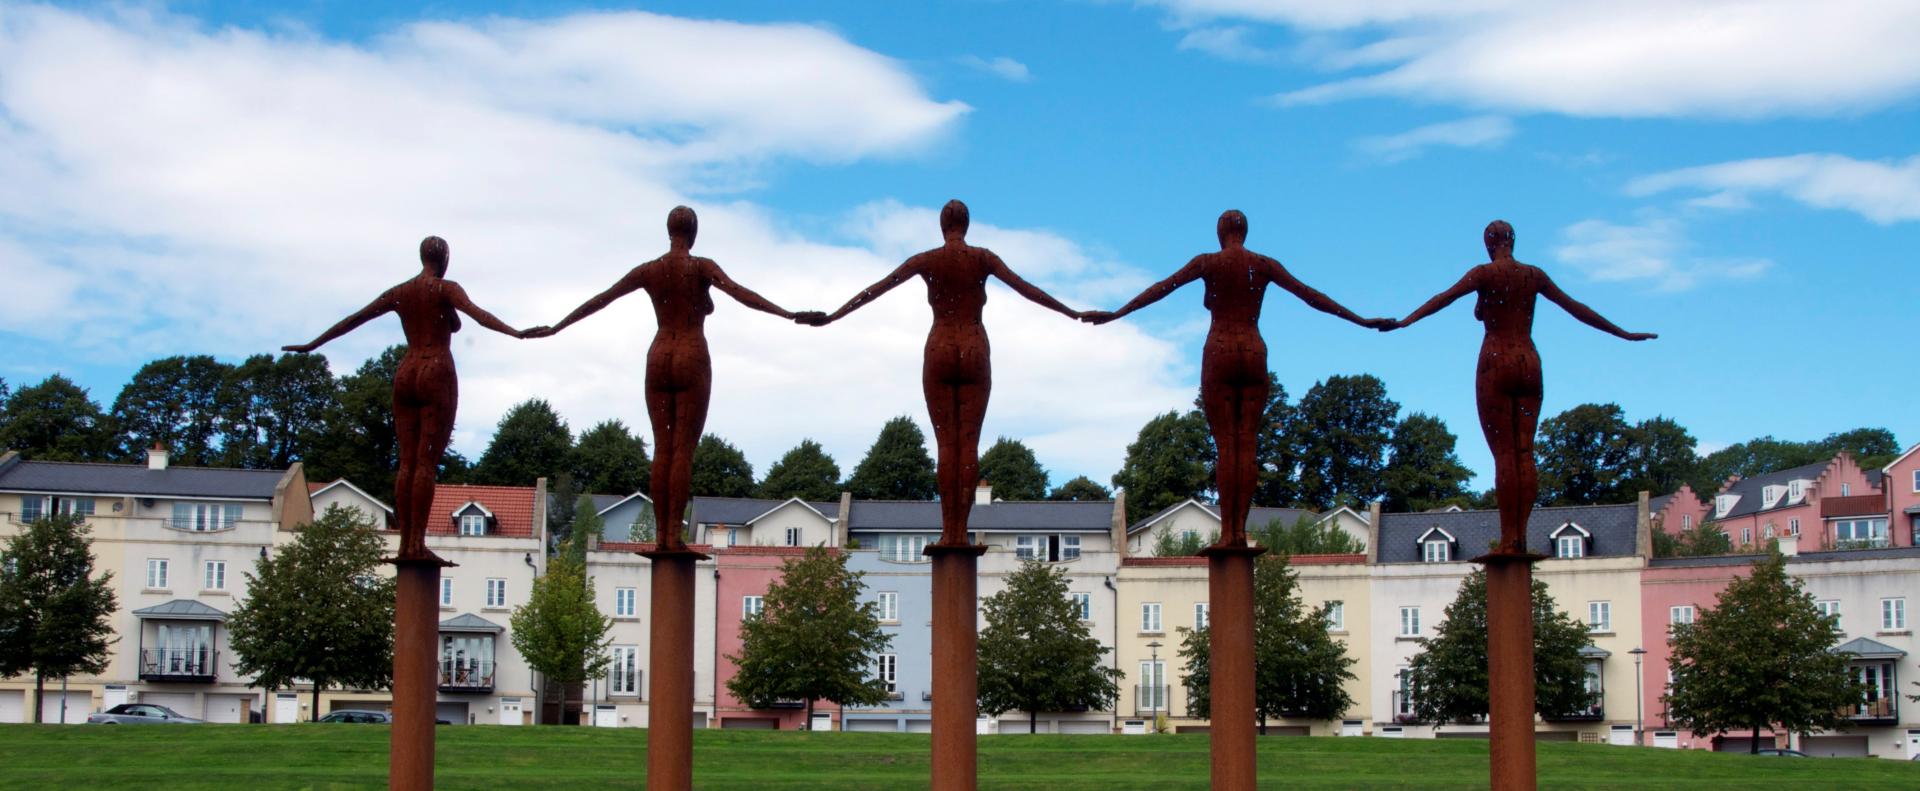 sculpture of five women standing together on pillars with their hands joined